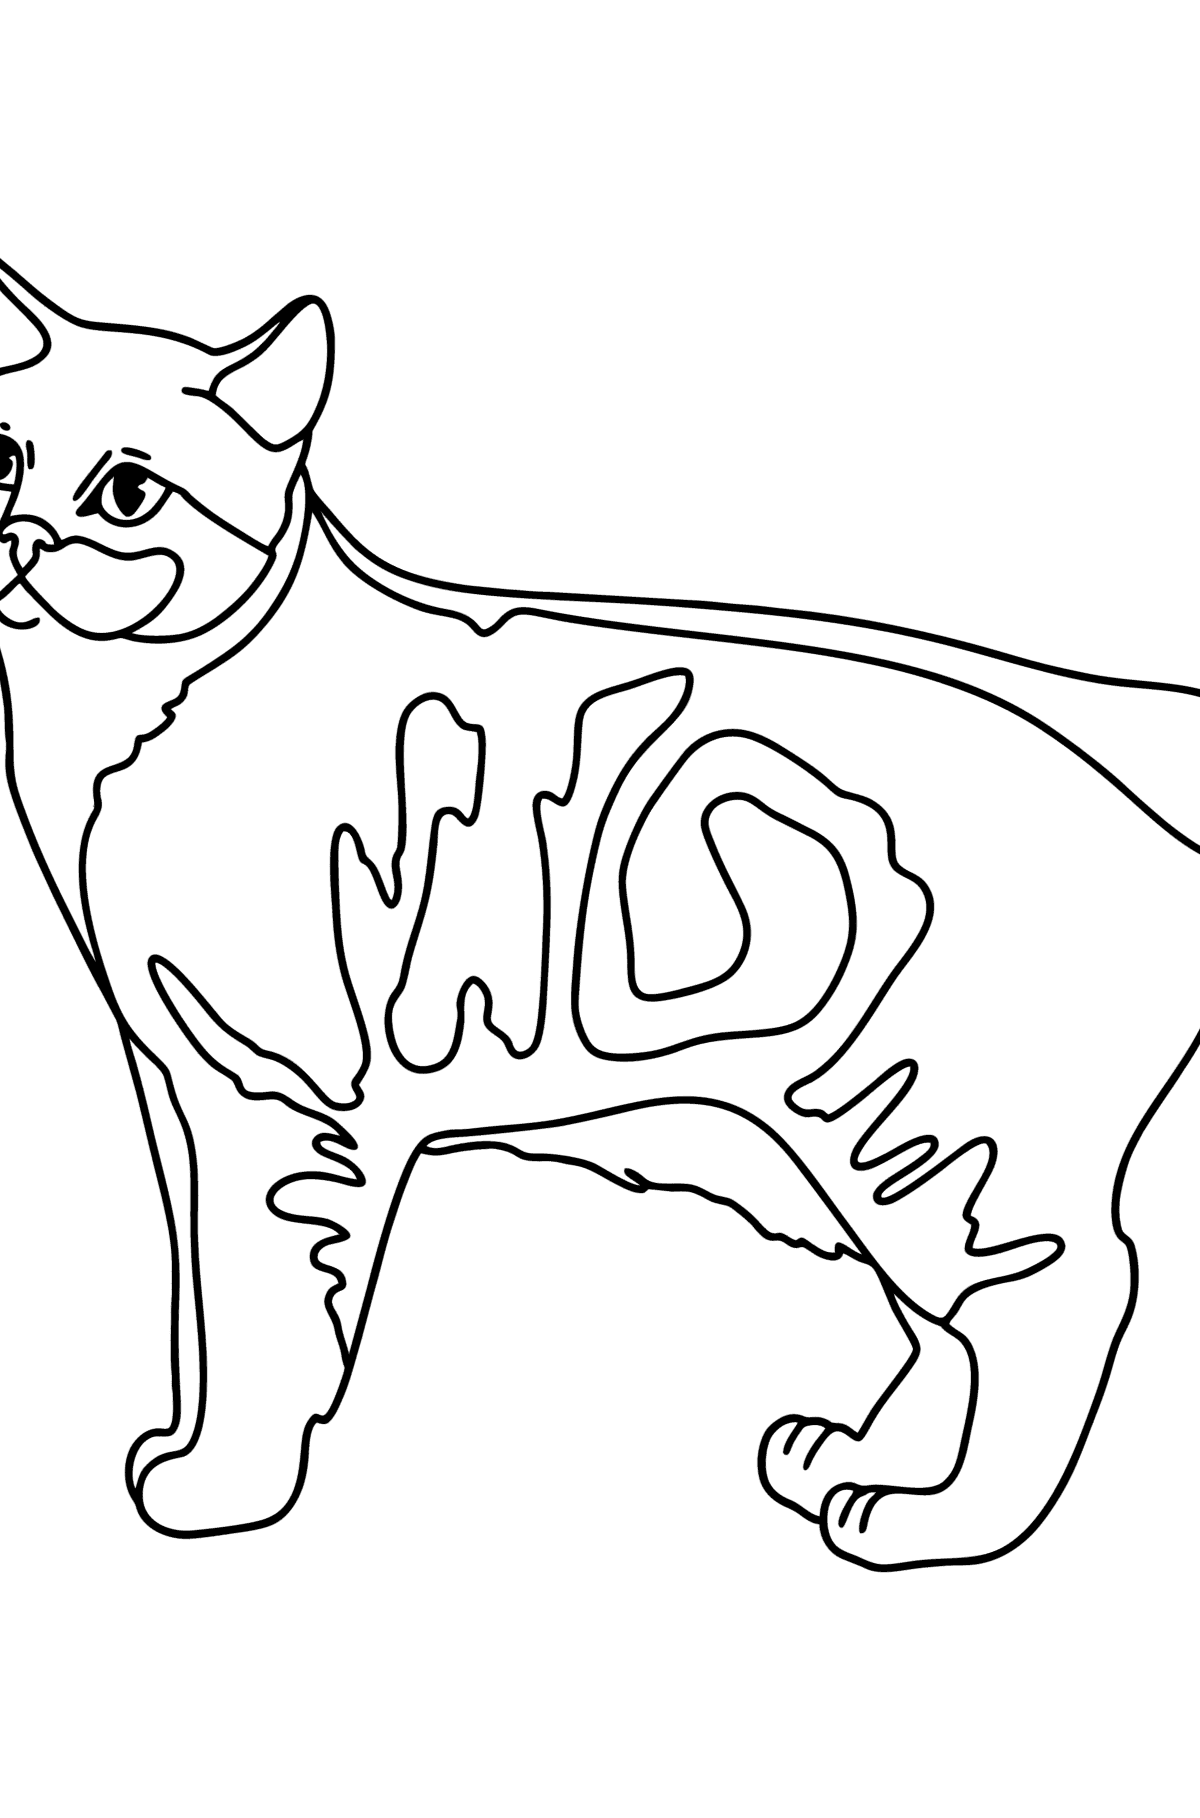 Manx Cat coloring page - Coloring Pages for Kids